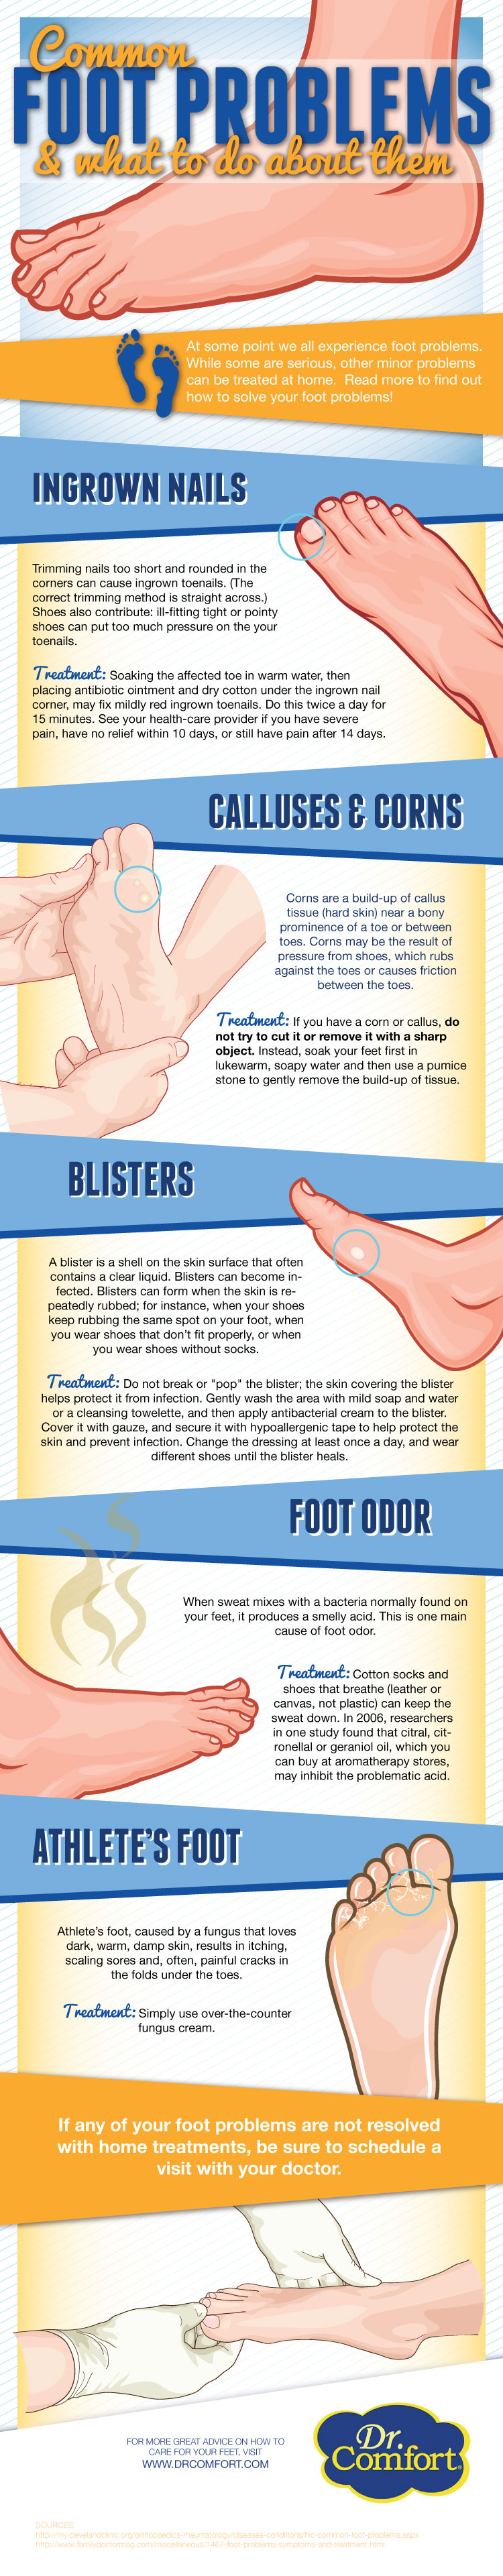 Remedies to Common Foot Problems